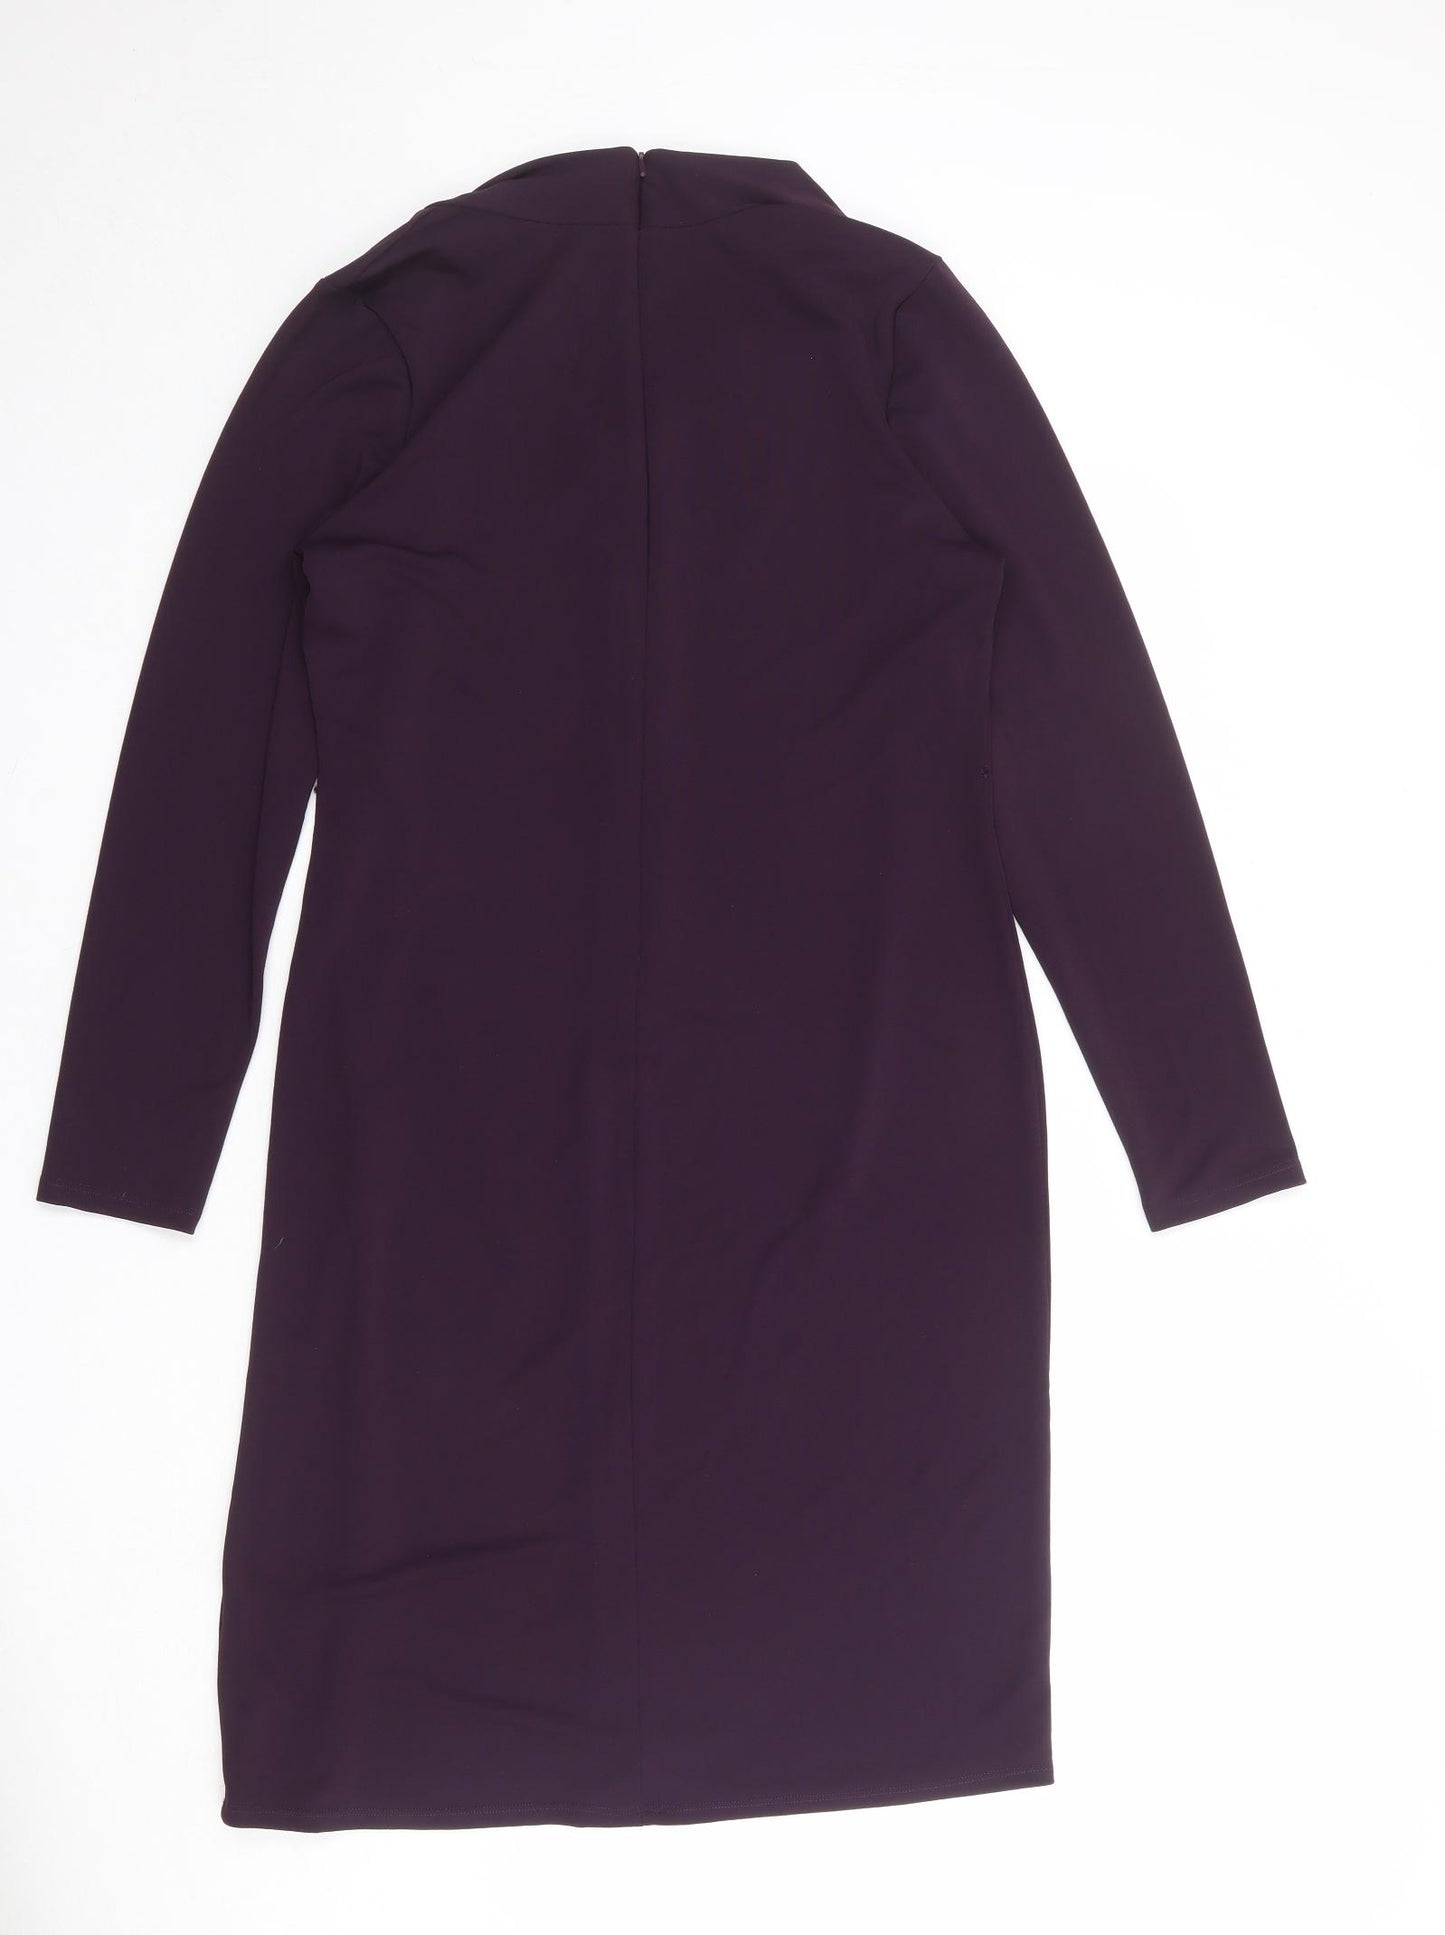 Marks and Spencer Womens Purple Polyester Sheath Size 18 V-Neck Zip